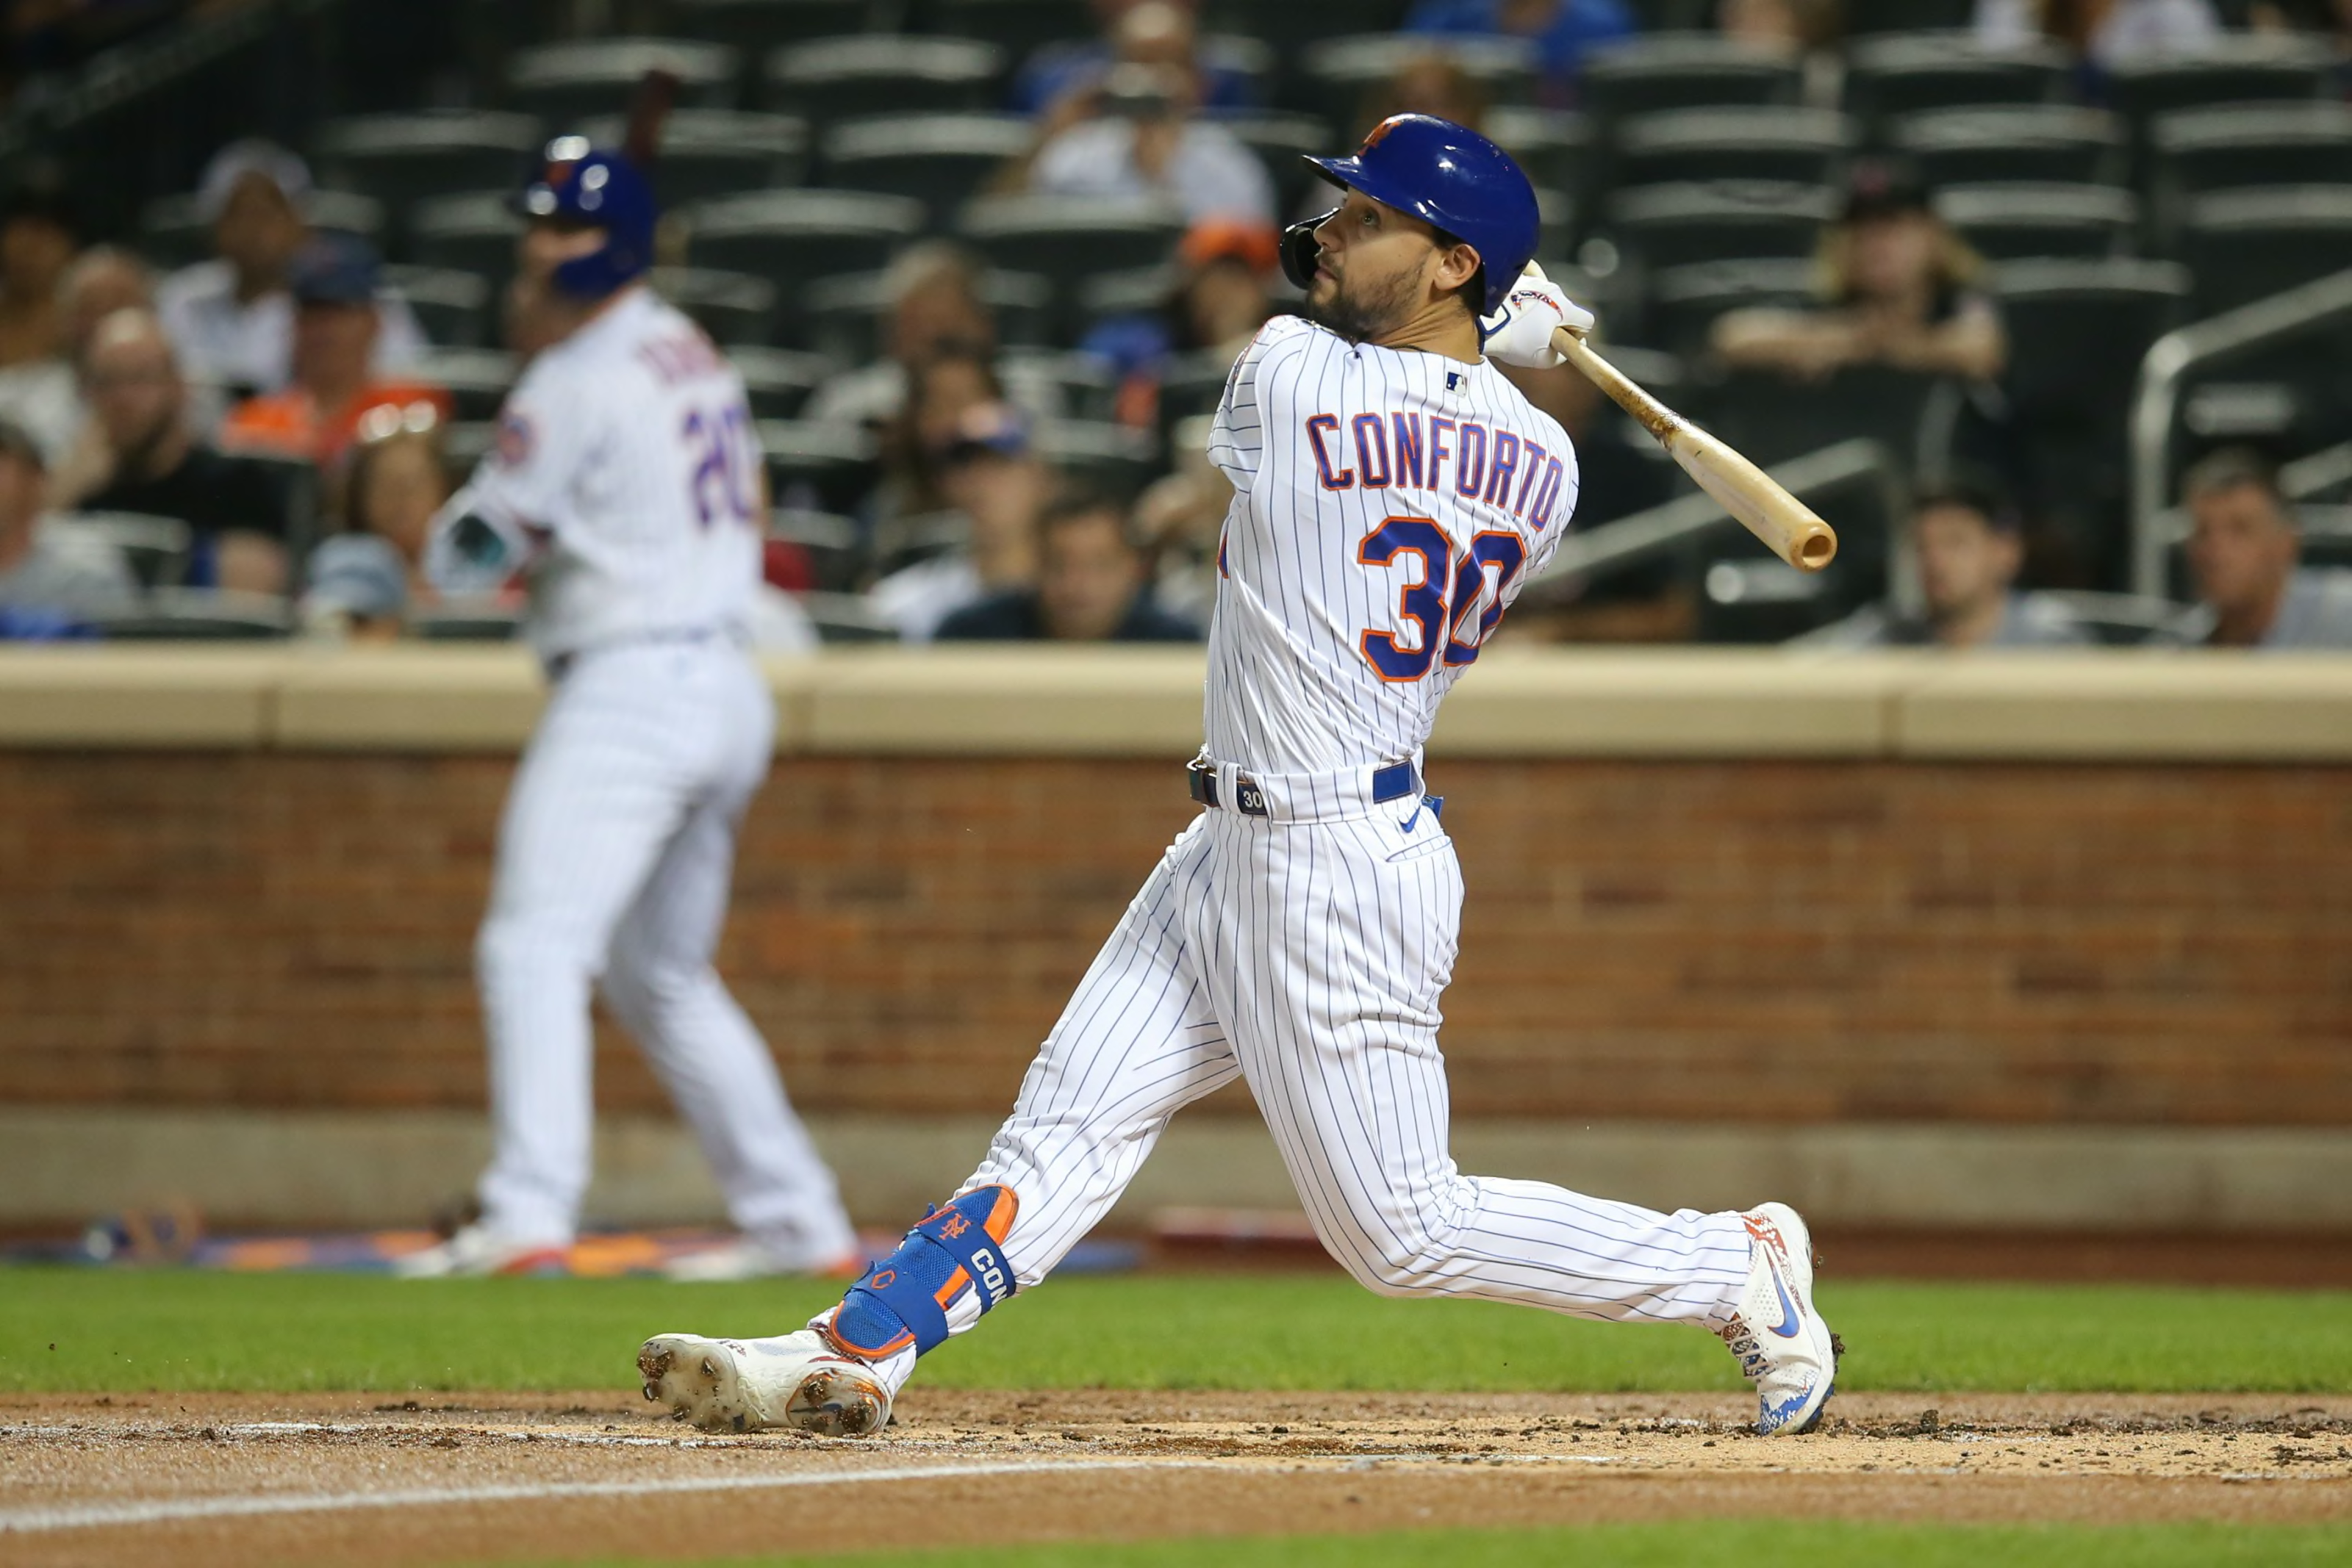 Mets slugger Michael Conforto sent to NY to see doctor